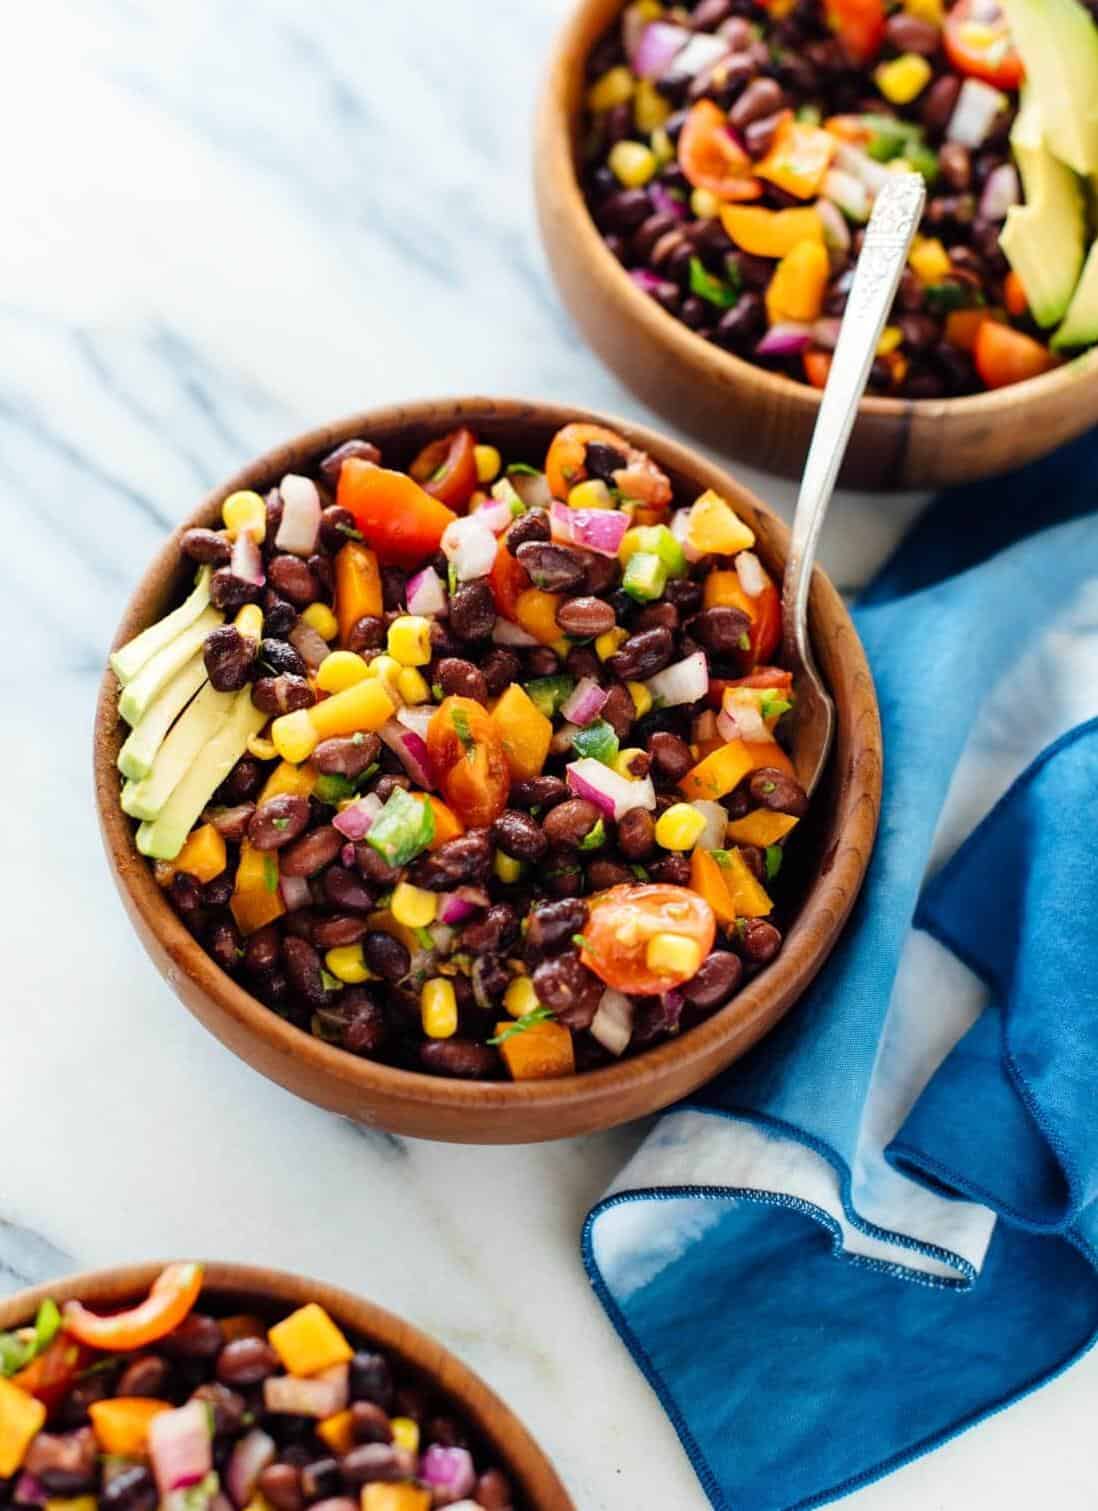  This salad is the ultimate crowd-pleaser - it's vegan, gluten-free, and bursting with nutrients.